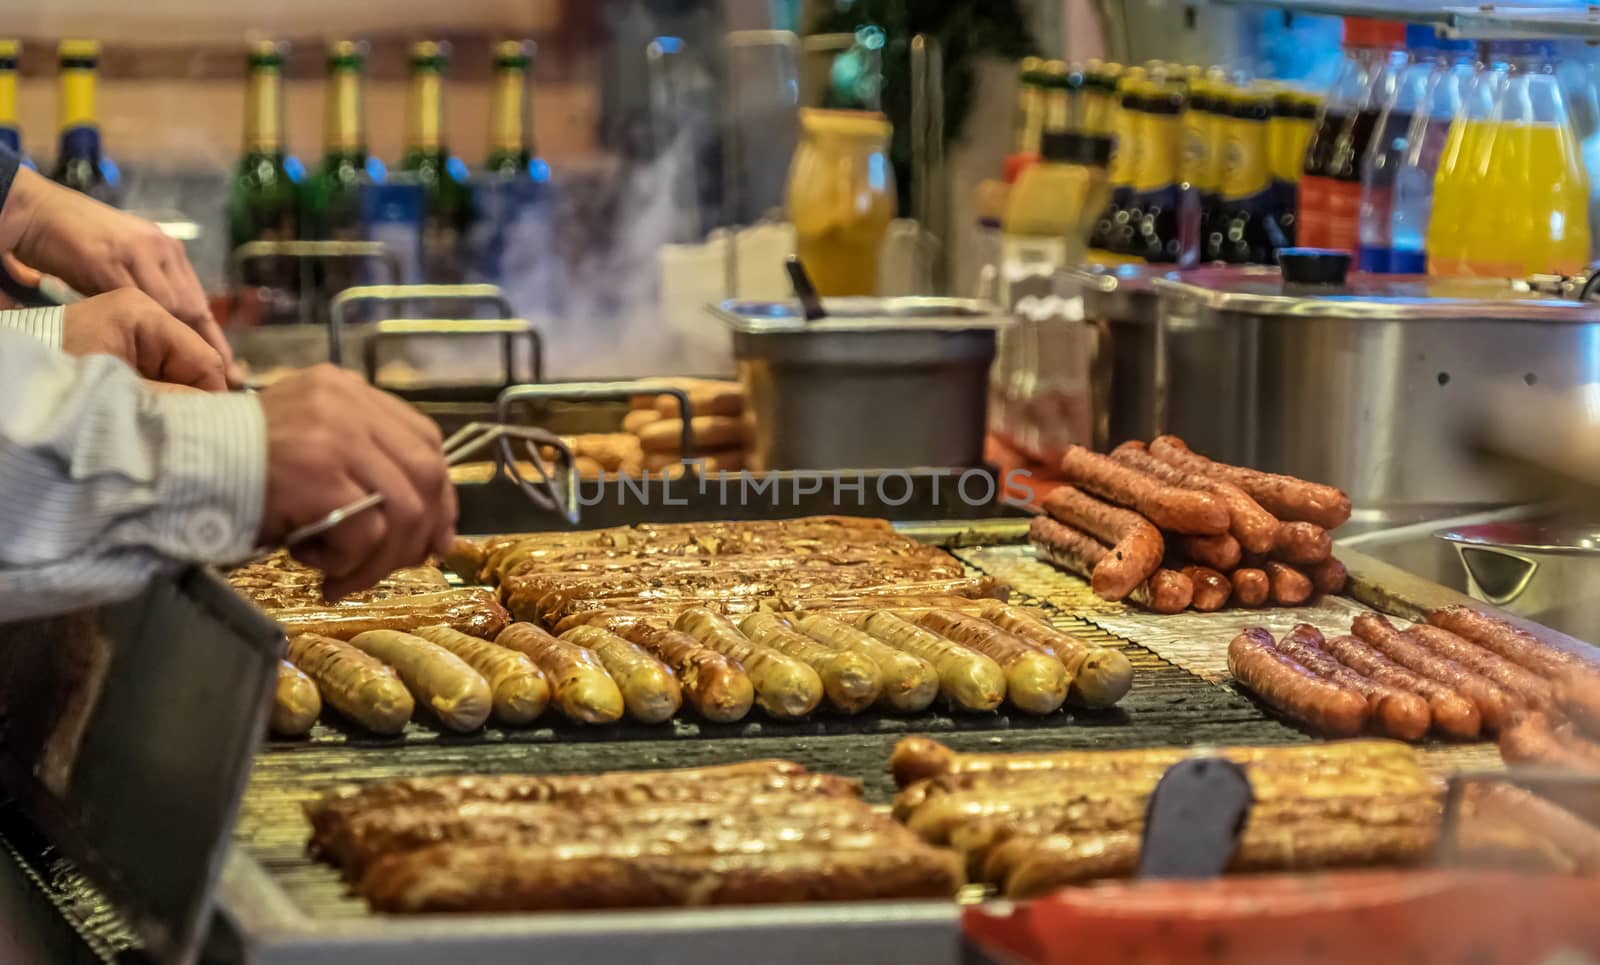 Bratwurst on the grill grid at a booth at the Christmas market in Braunschweig, Germany, detail view